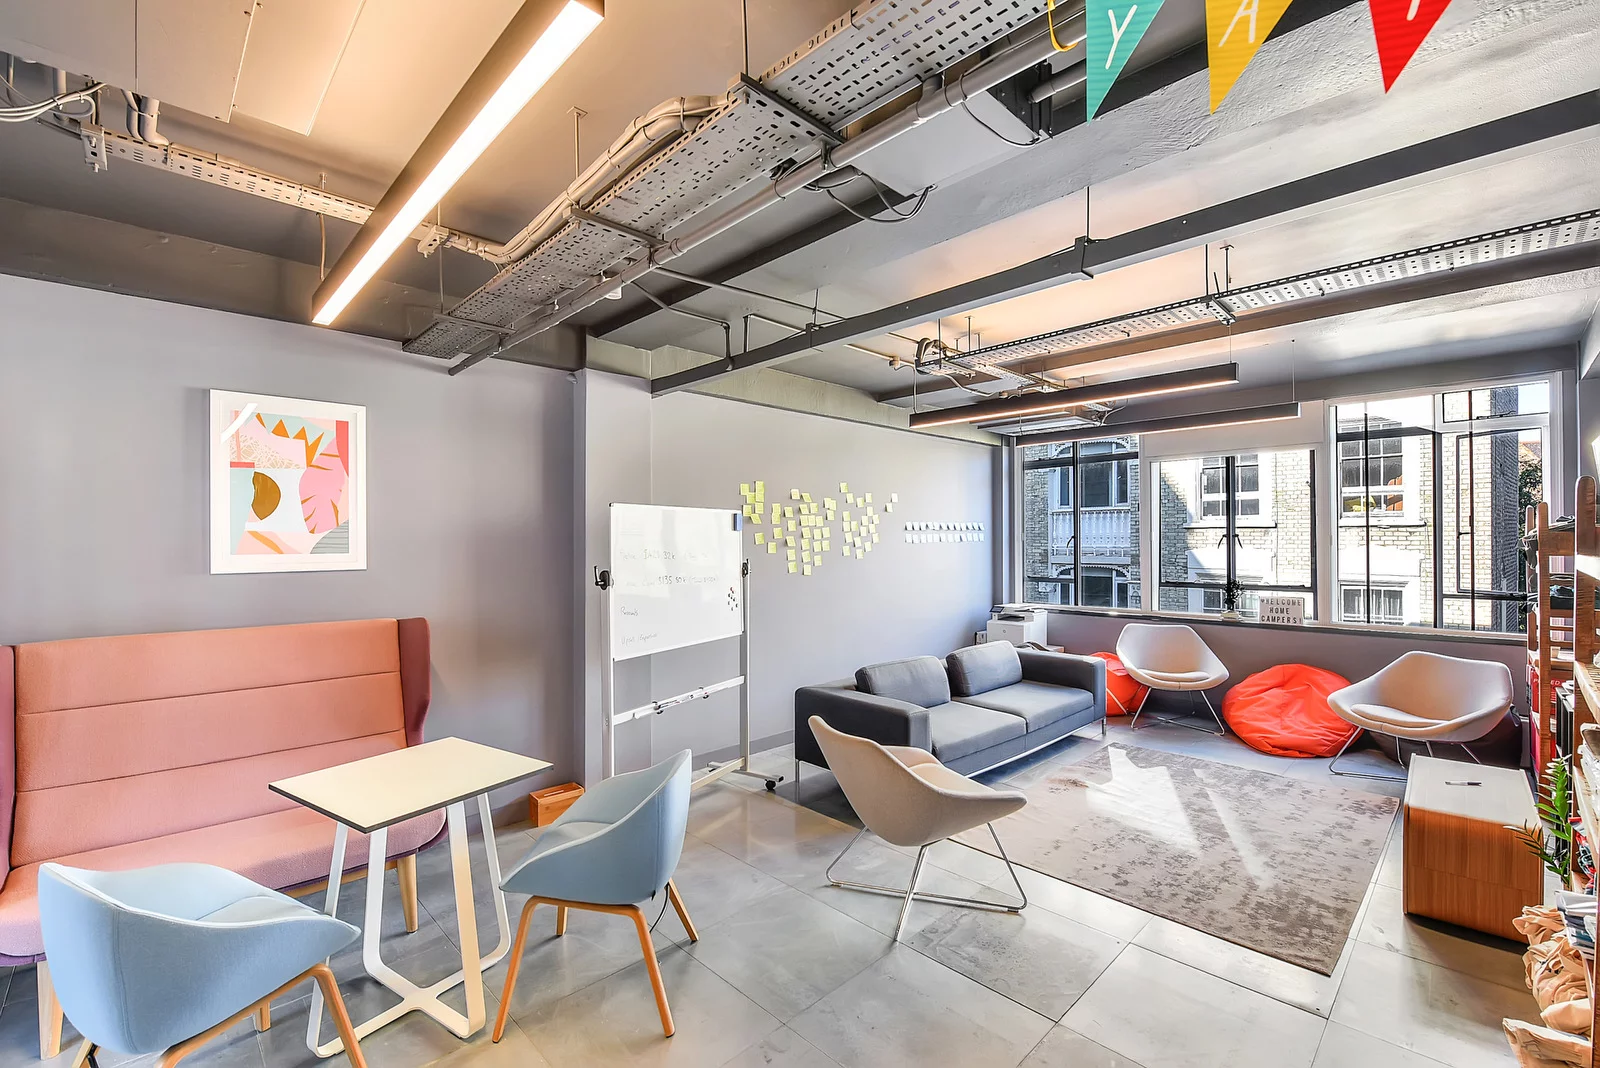 Serviced offices meaning - a workspace that encourages collaboration